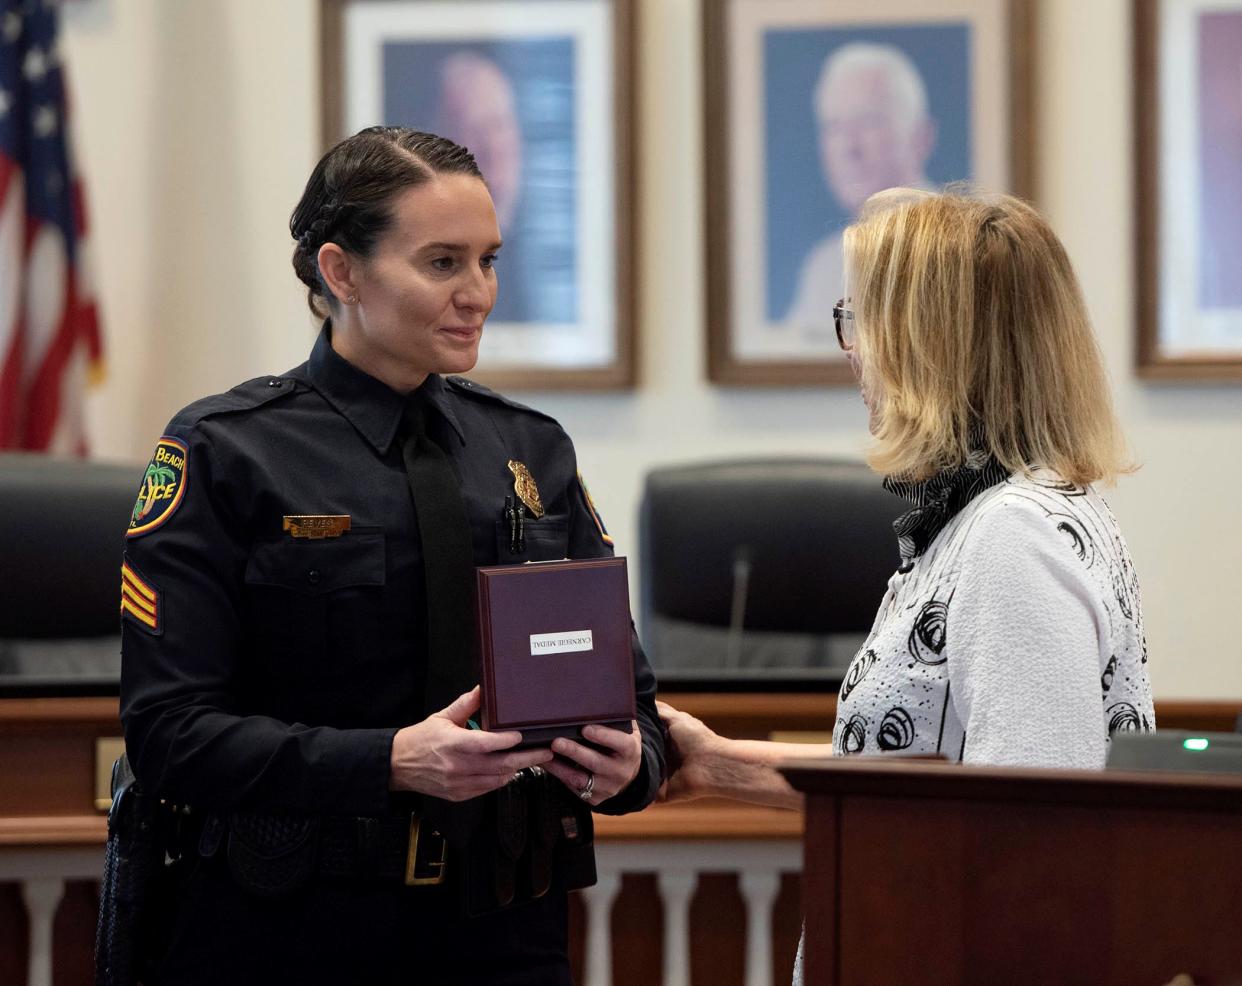 Nancy Rackoff, right, presents Palm Beach Police Sgt. Kendall Reyes with the Carnegie Medal during the police department promotional and awards ceremony at Town Council chambers Friday.